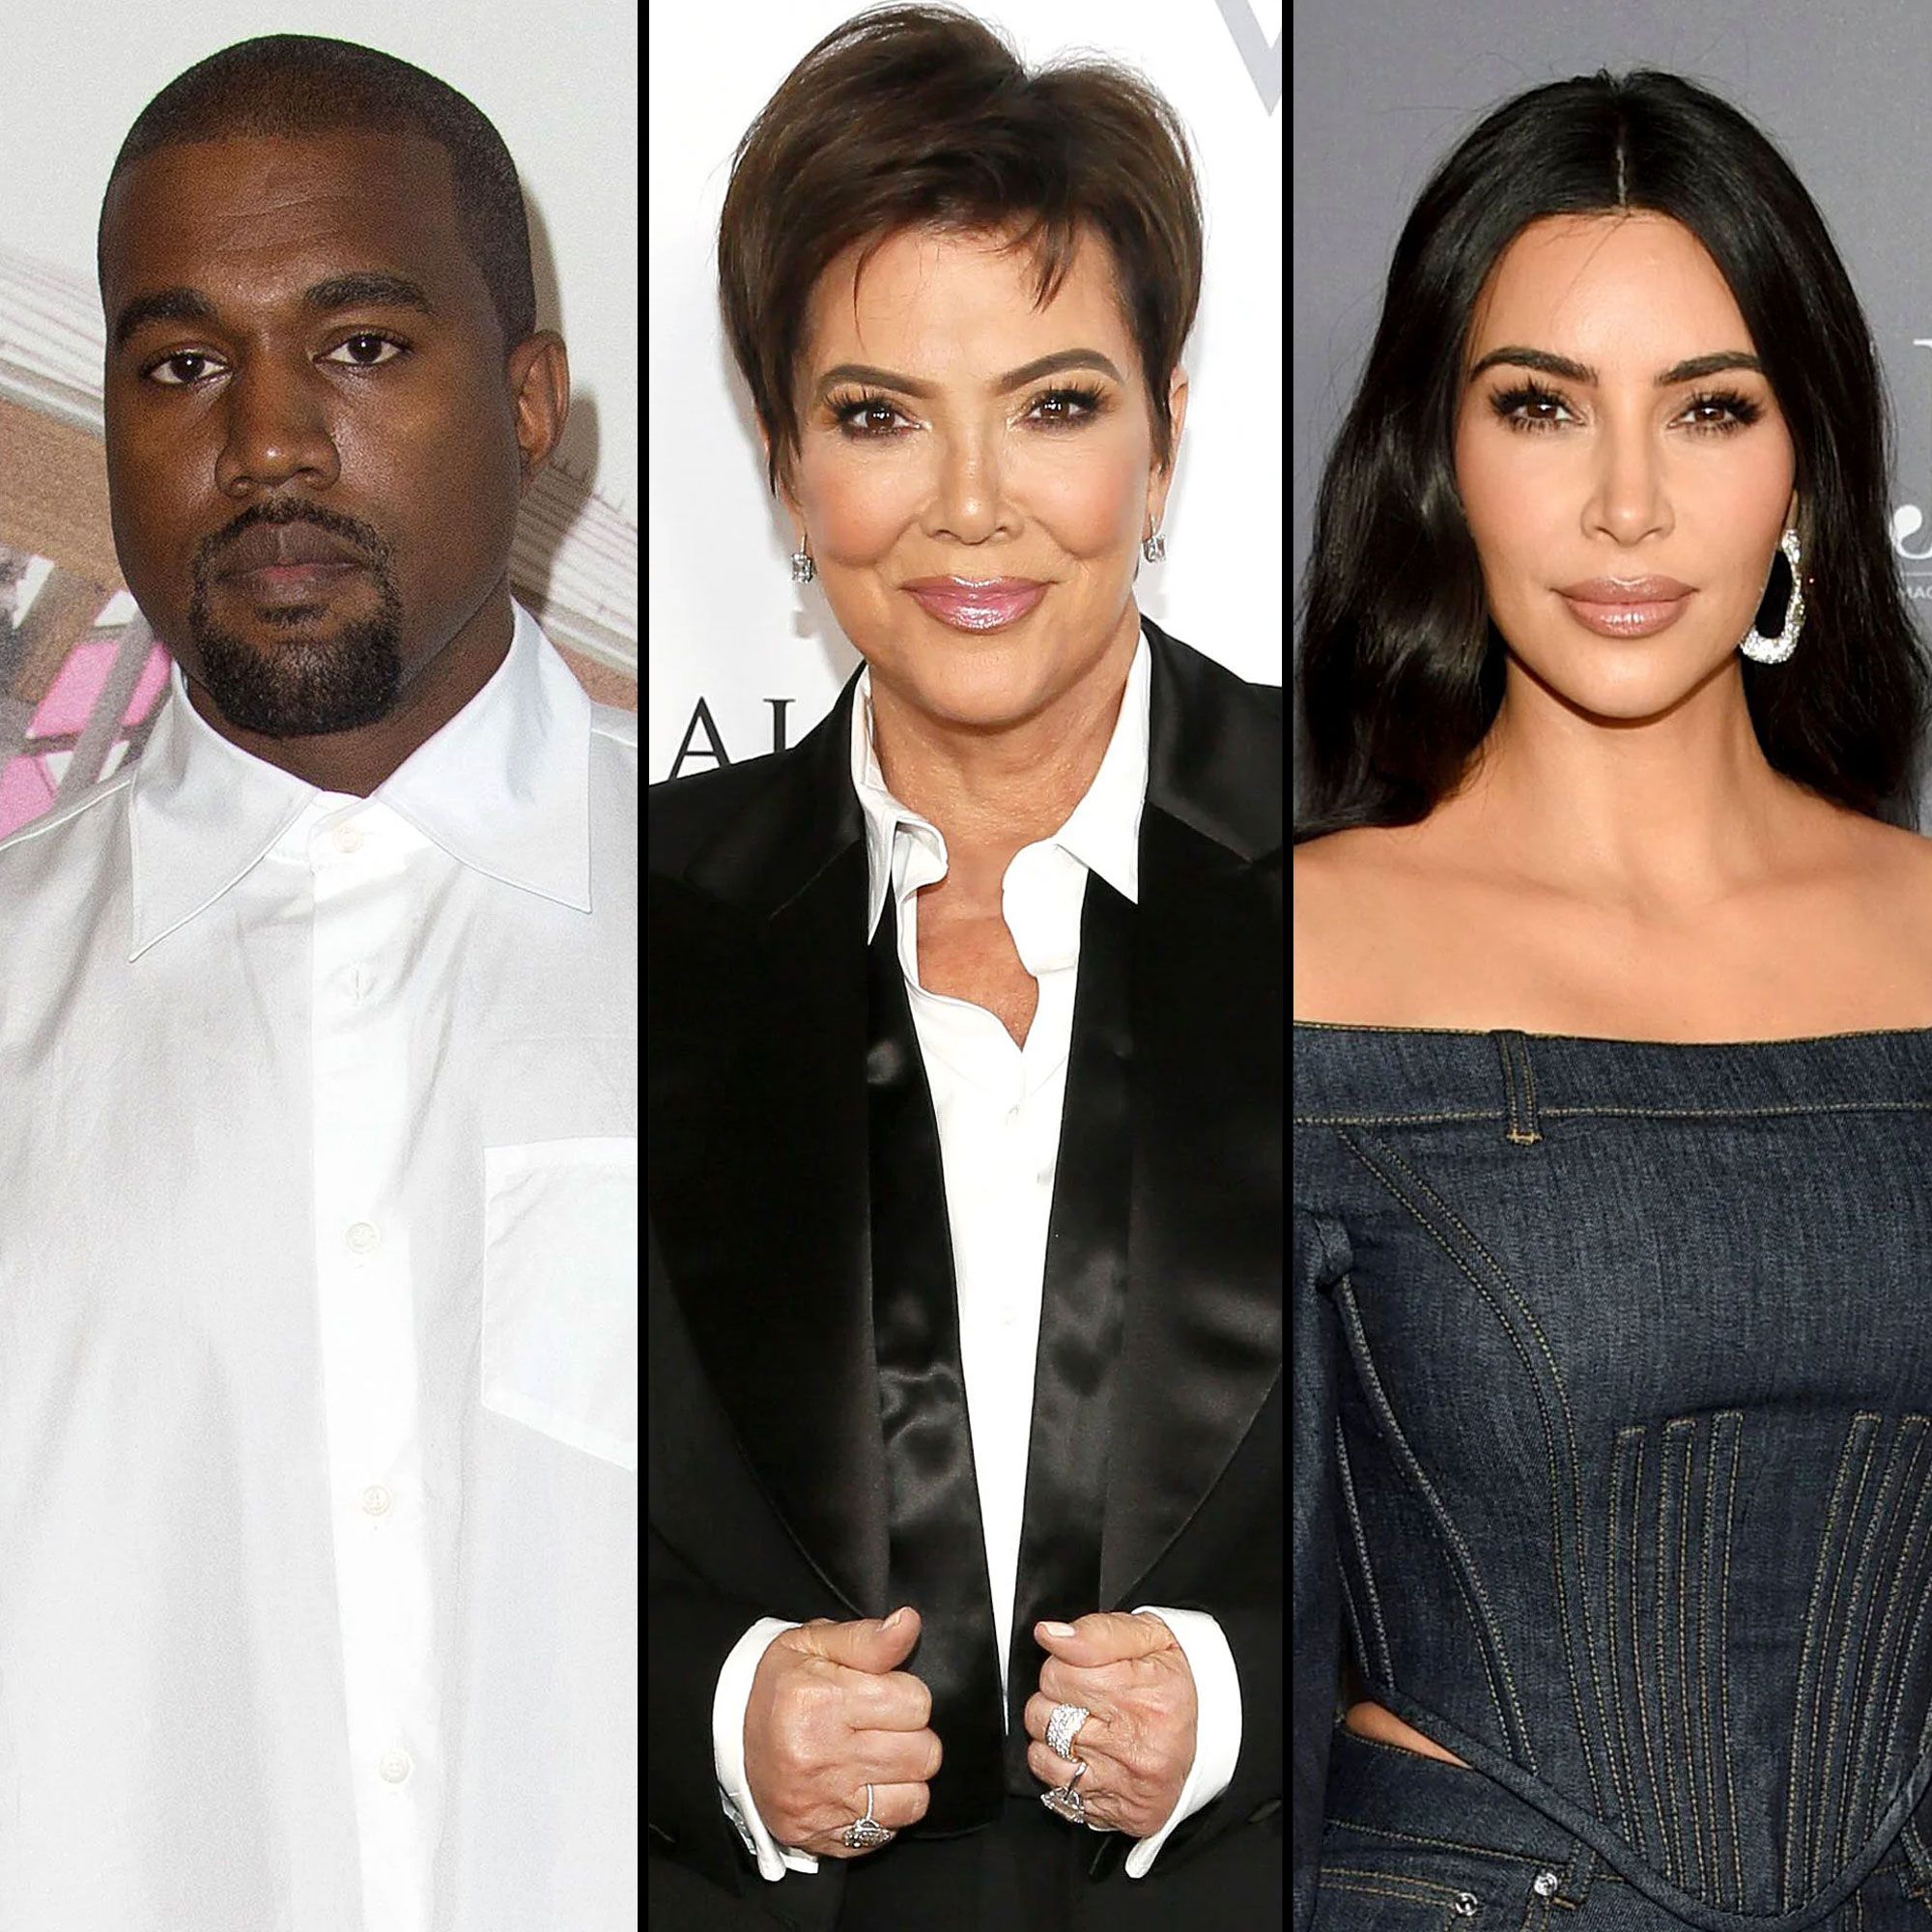 Kanye West Calls Out Kris Jenner, Claims Porn Destroyed Family pic